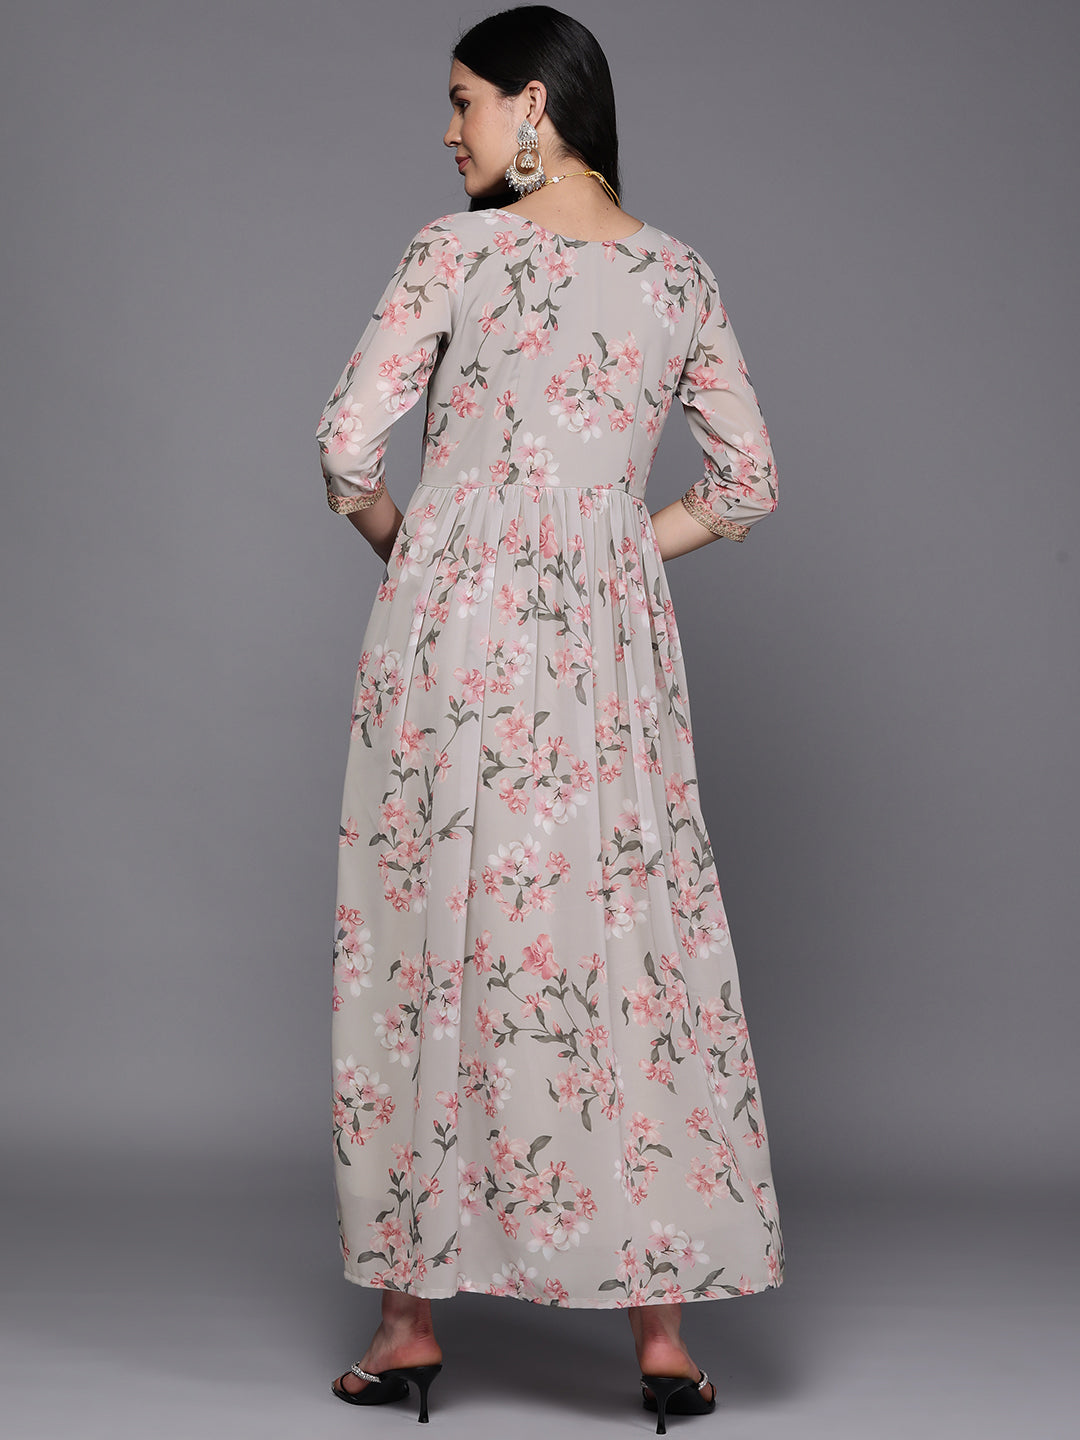 Grey Embroidered Floral Printed Ethnic Dress